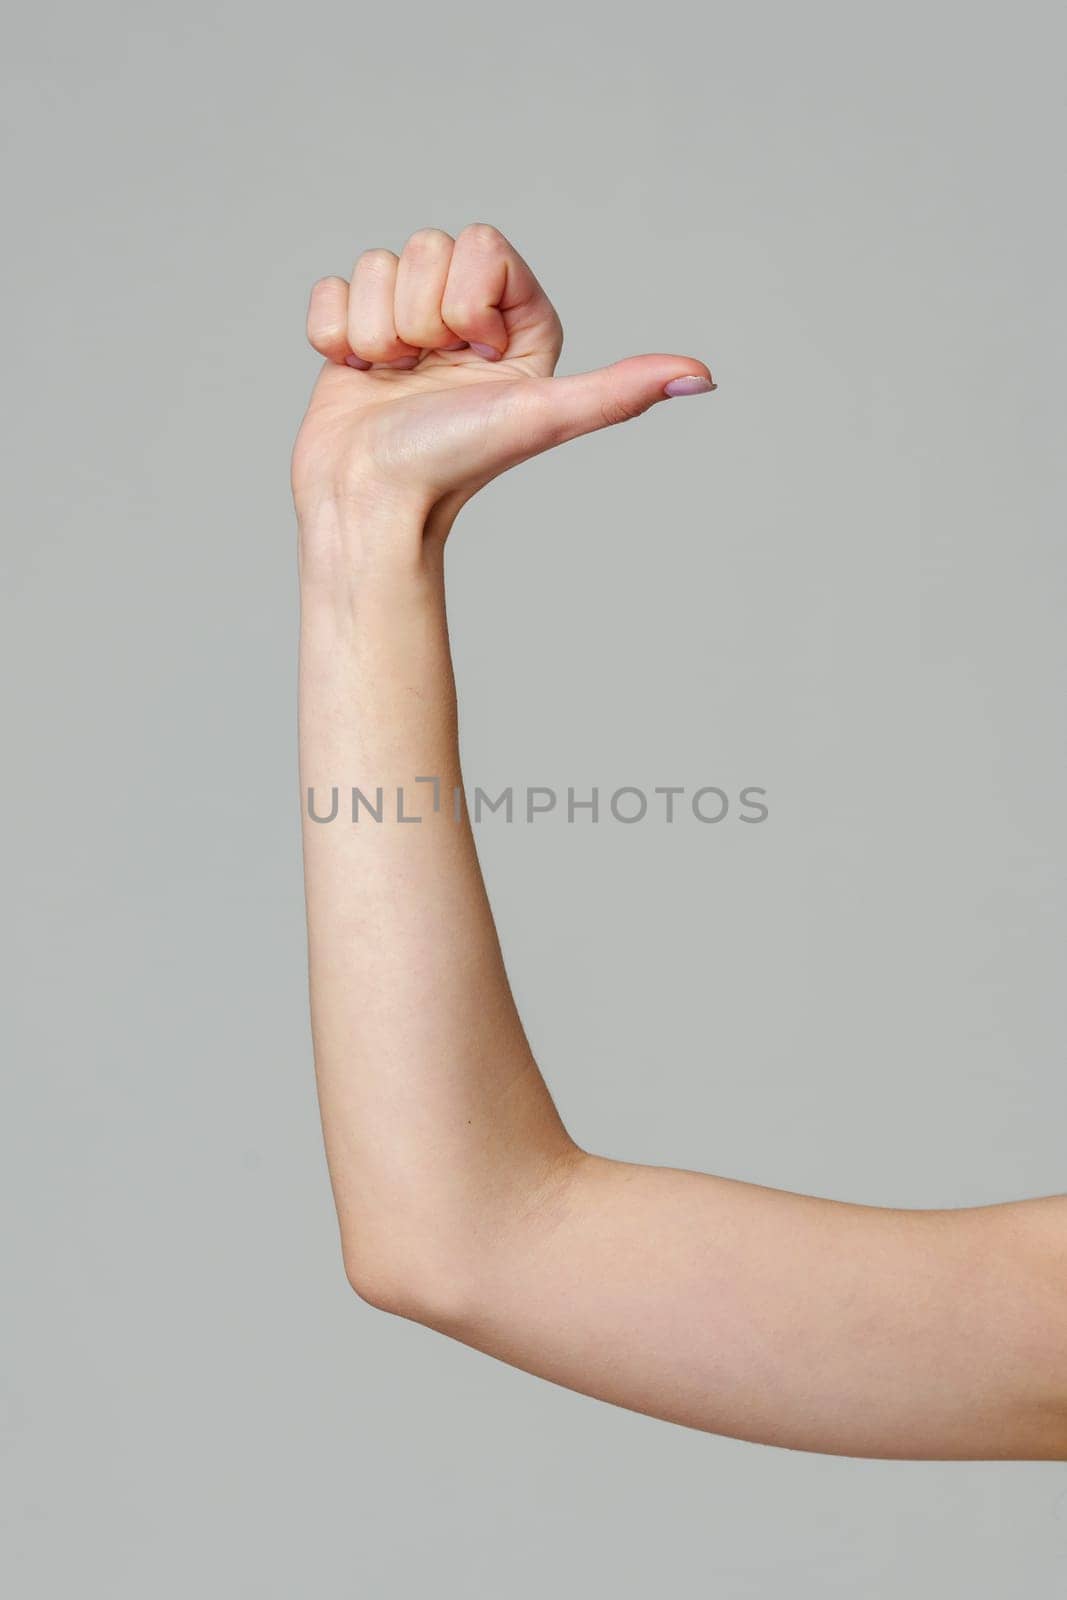 Female hand gesturing thumb up sign on gray background by Fabrikasimf